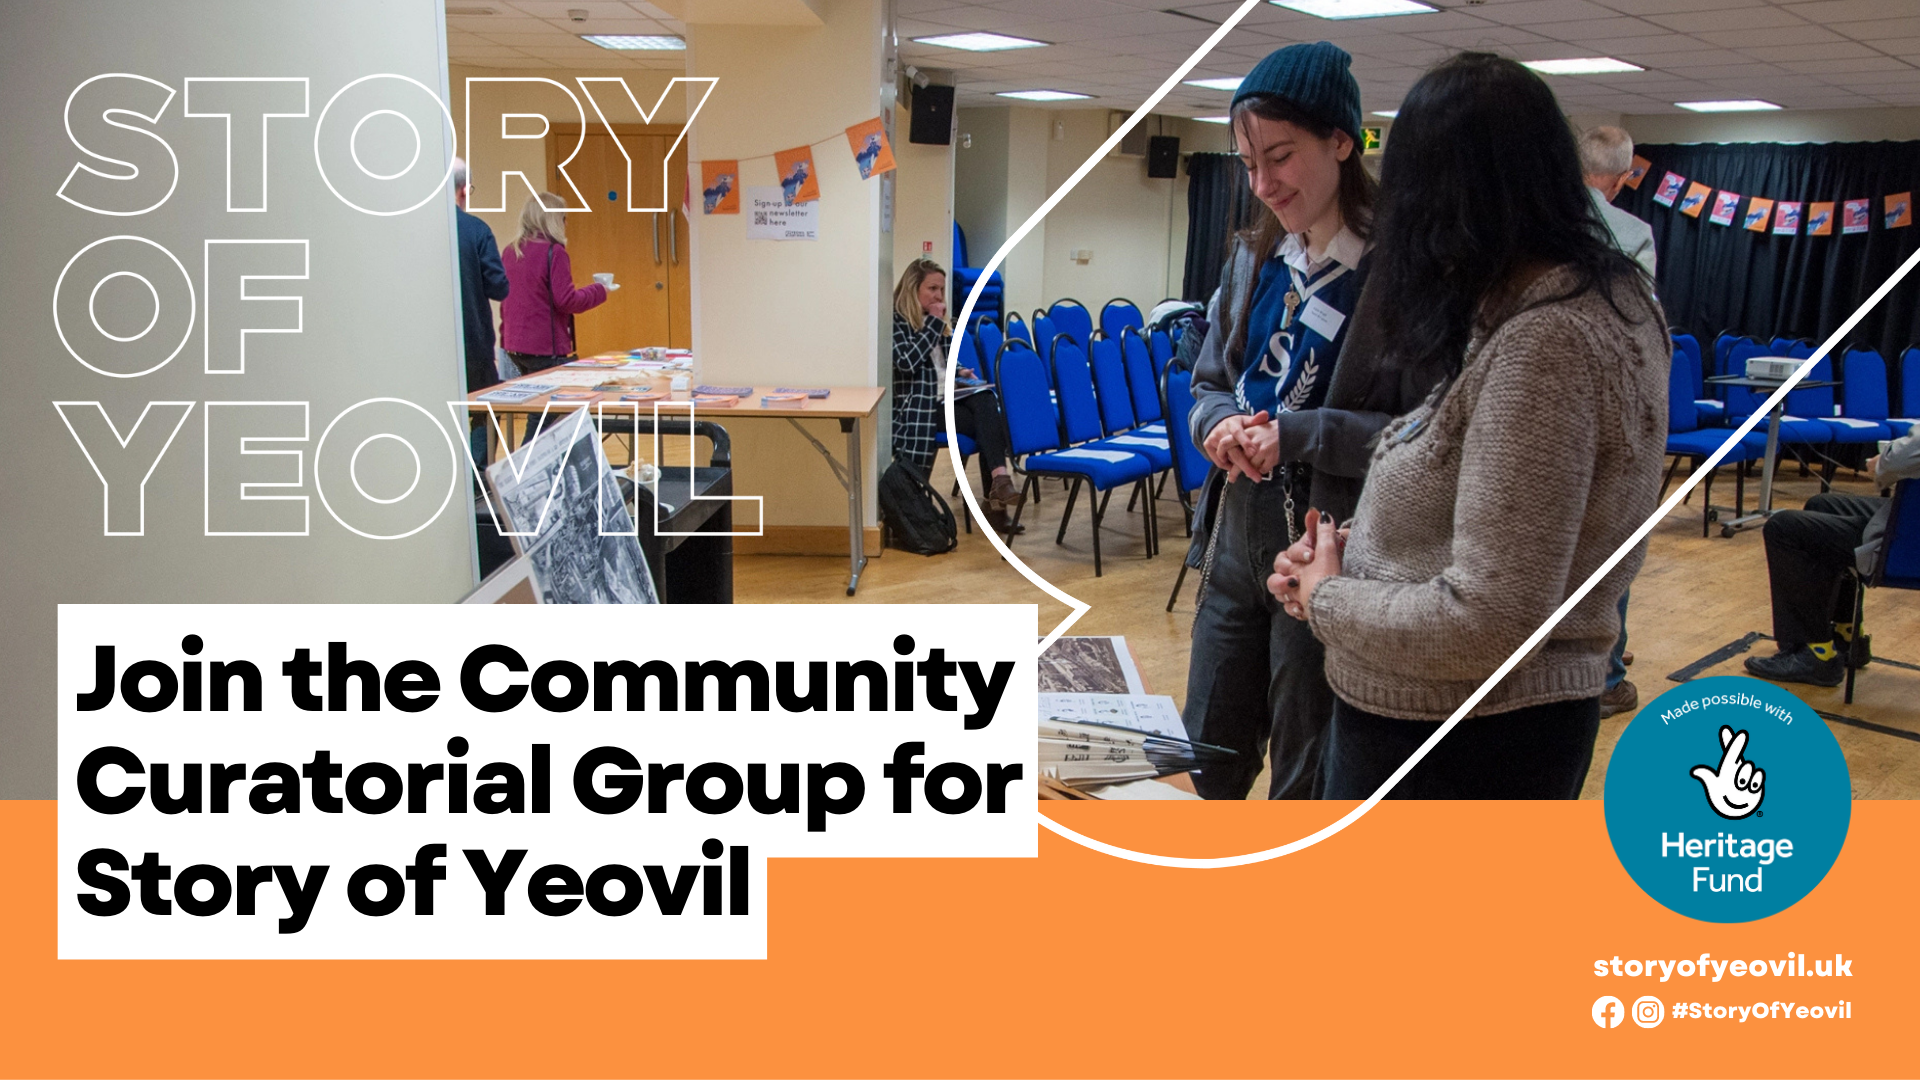 Featured image for “Join the Community Curatorial Group for Story of Yeovil”